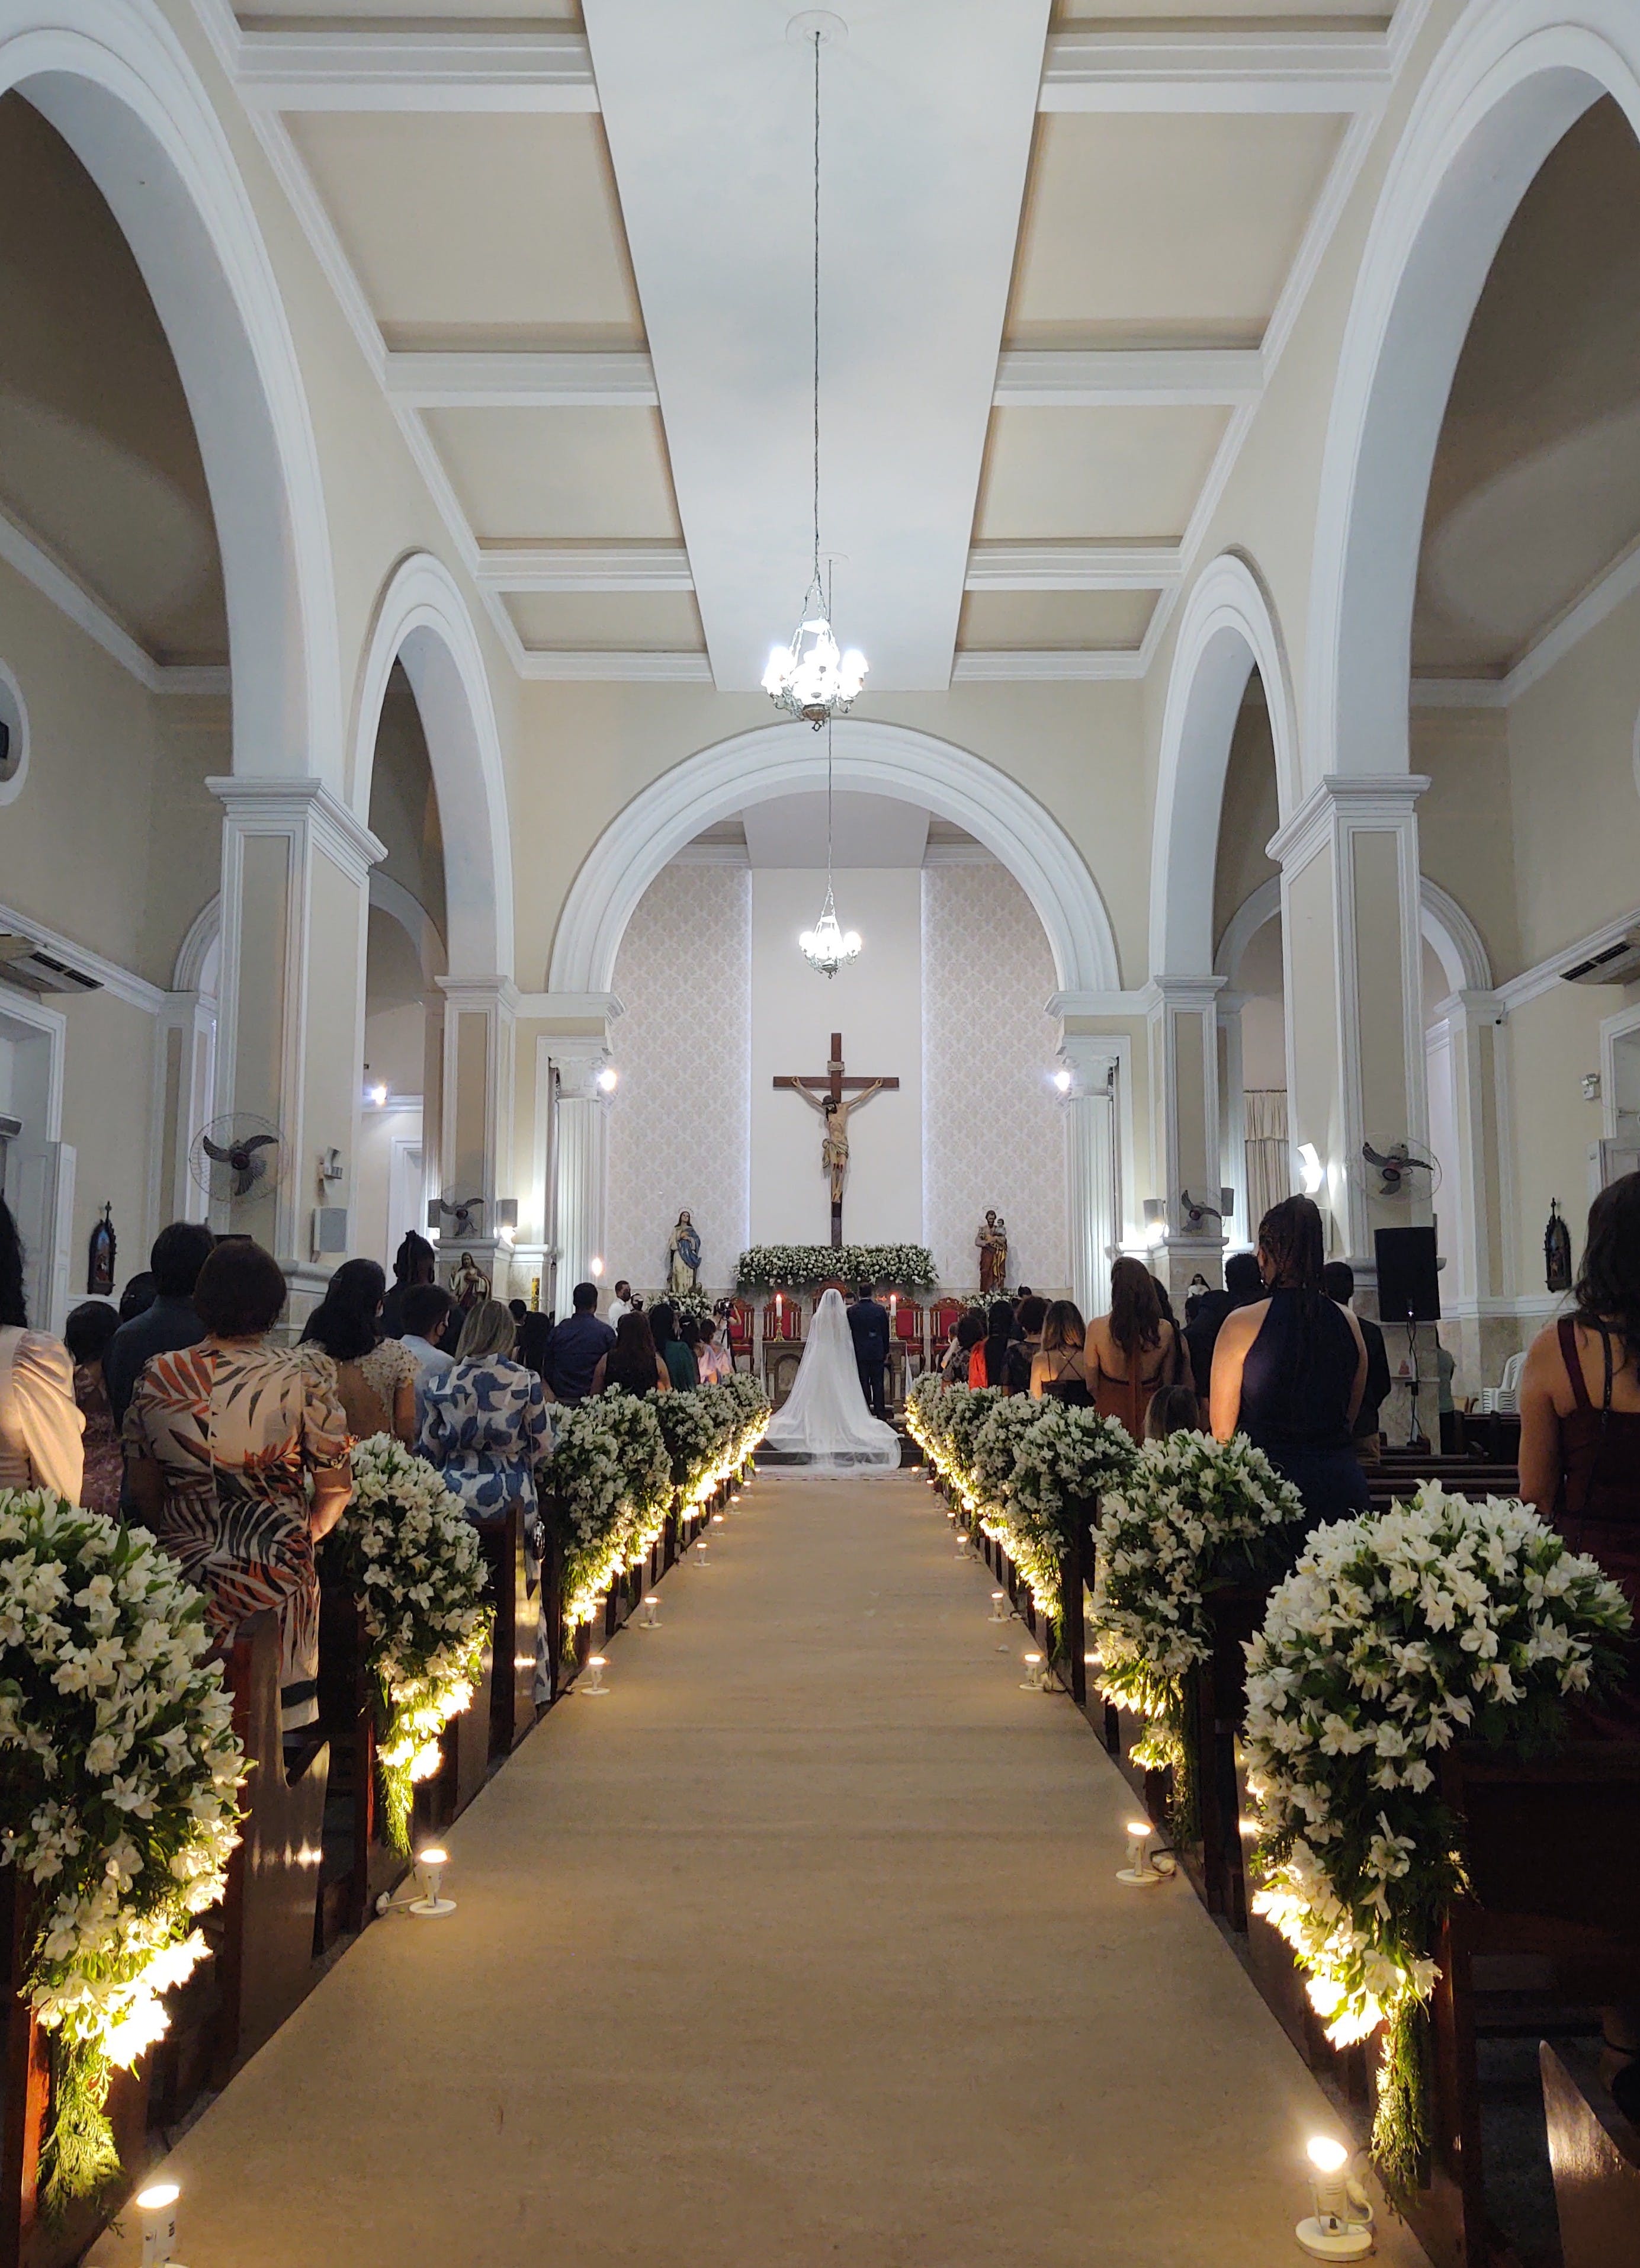 A church decorated for a wedding day event while filled with people | Source: Pexels